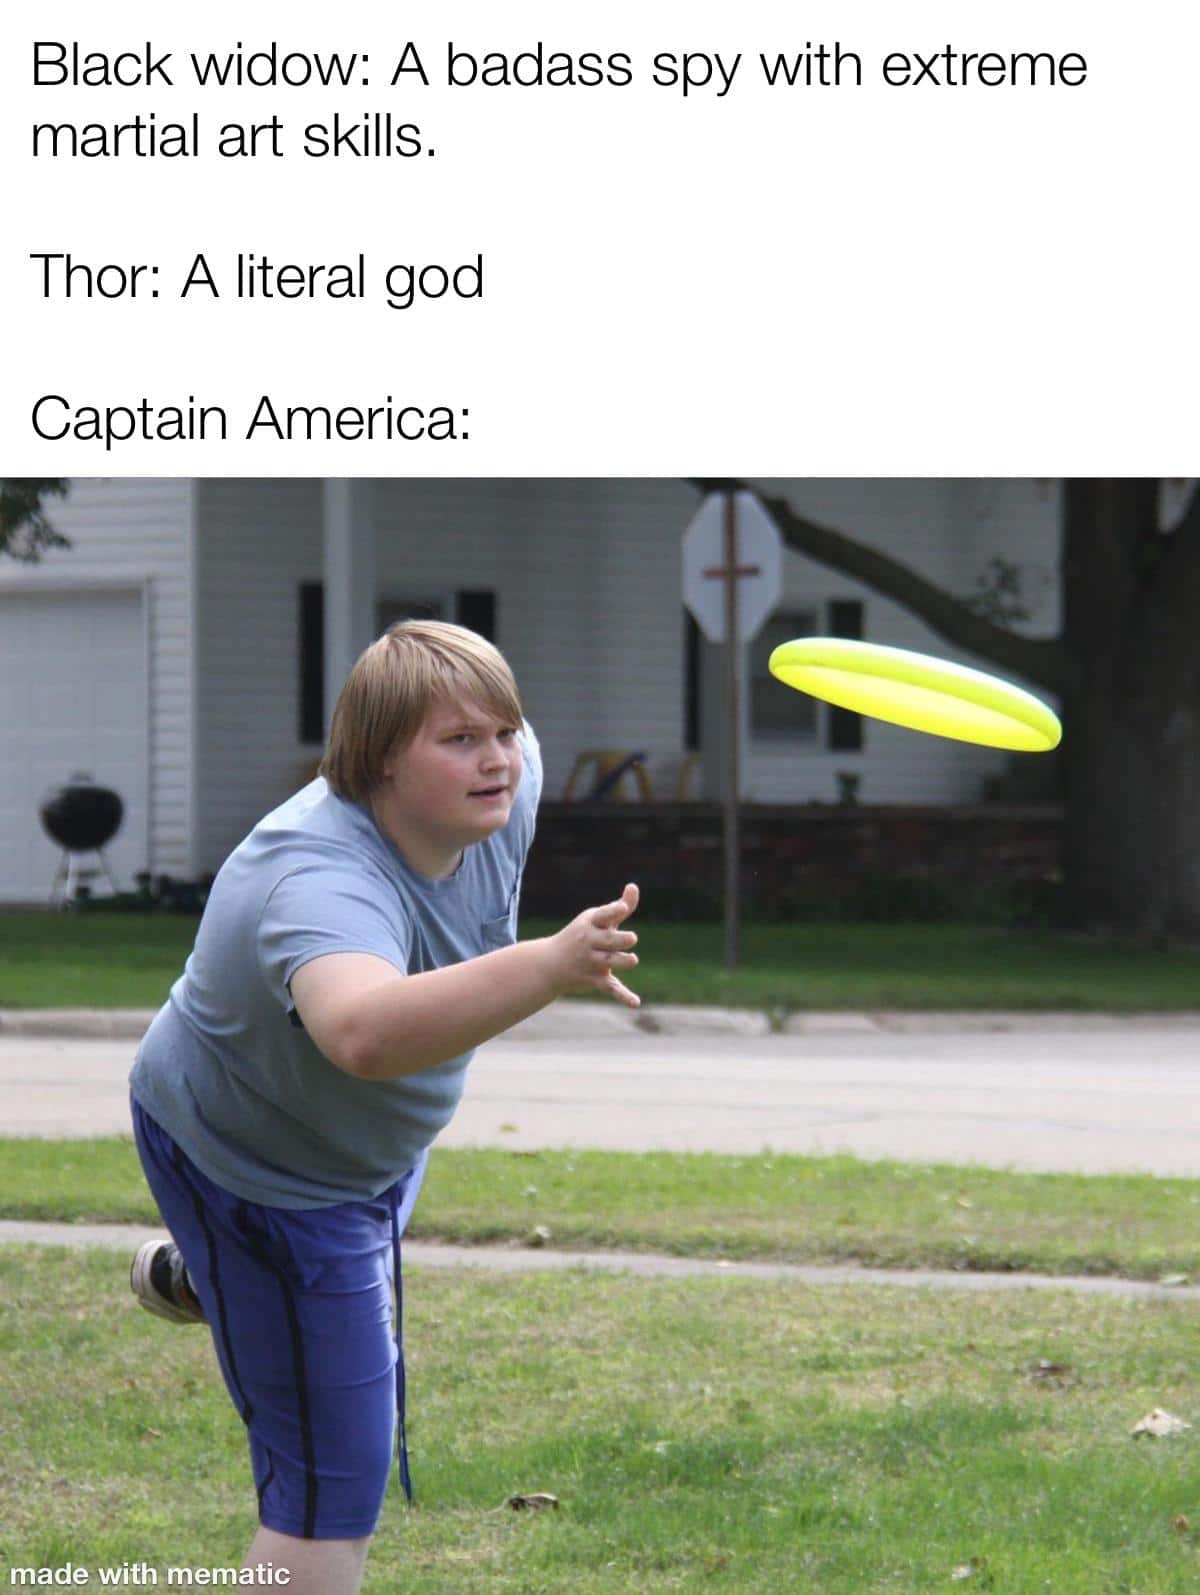 Funny, America, Hawkeye, American, Thor, Frisbee other memes Funny, America, Hawkeye, American, Thor, Frisbee text: Black widow: A badass spy with extreme martial art skills. Thor: A literal god Captain America: made with,mematic 